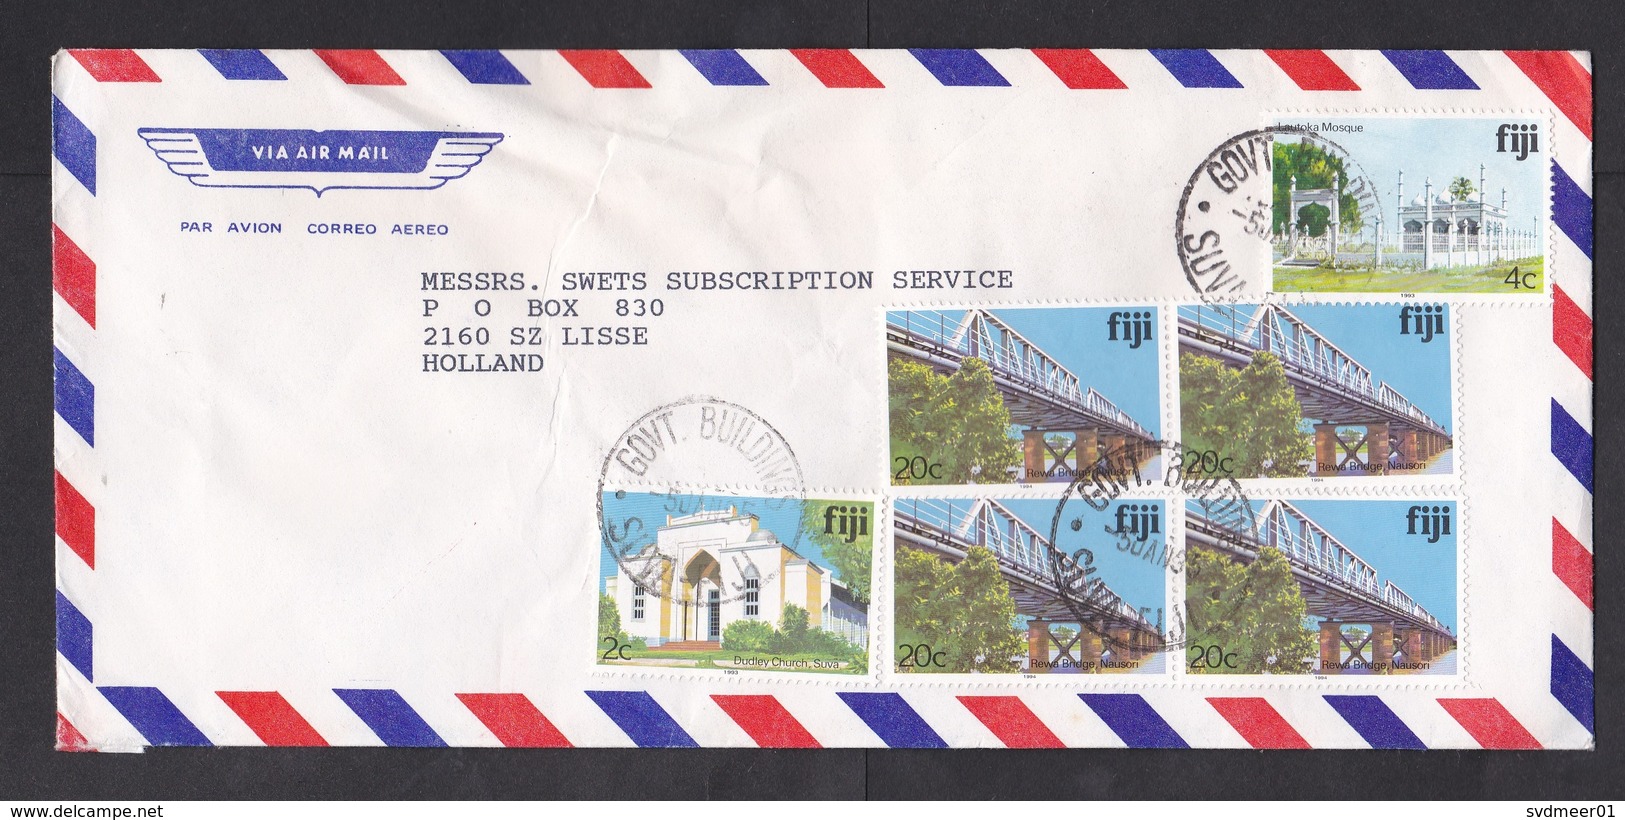 Fiji: Airmail Cover To Netherlands, 1995, 6 Stamps, Bridge, Mosque, Church, Architecture (creases) - Fiji (1970-...)